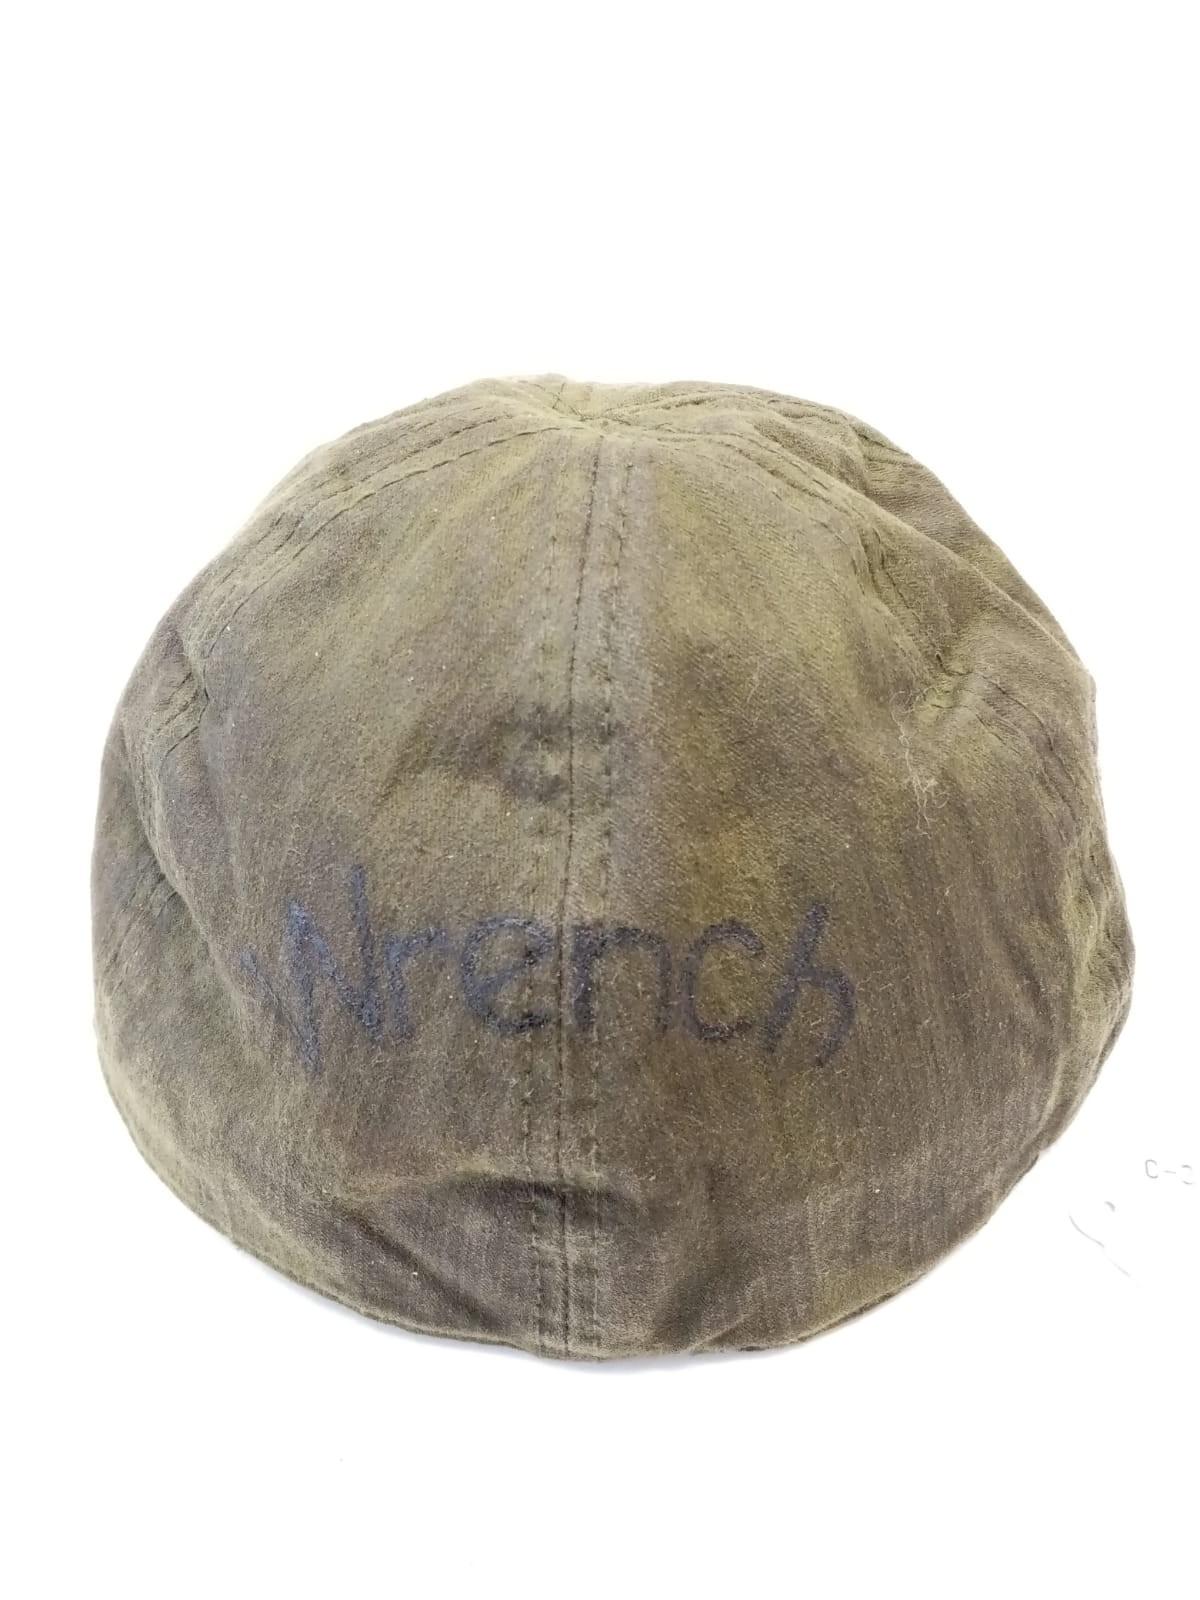 WW2 US Army Air Force mechanics cap with hand painted art - Image 3 of 5